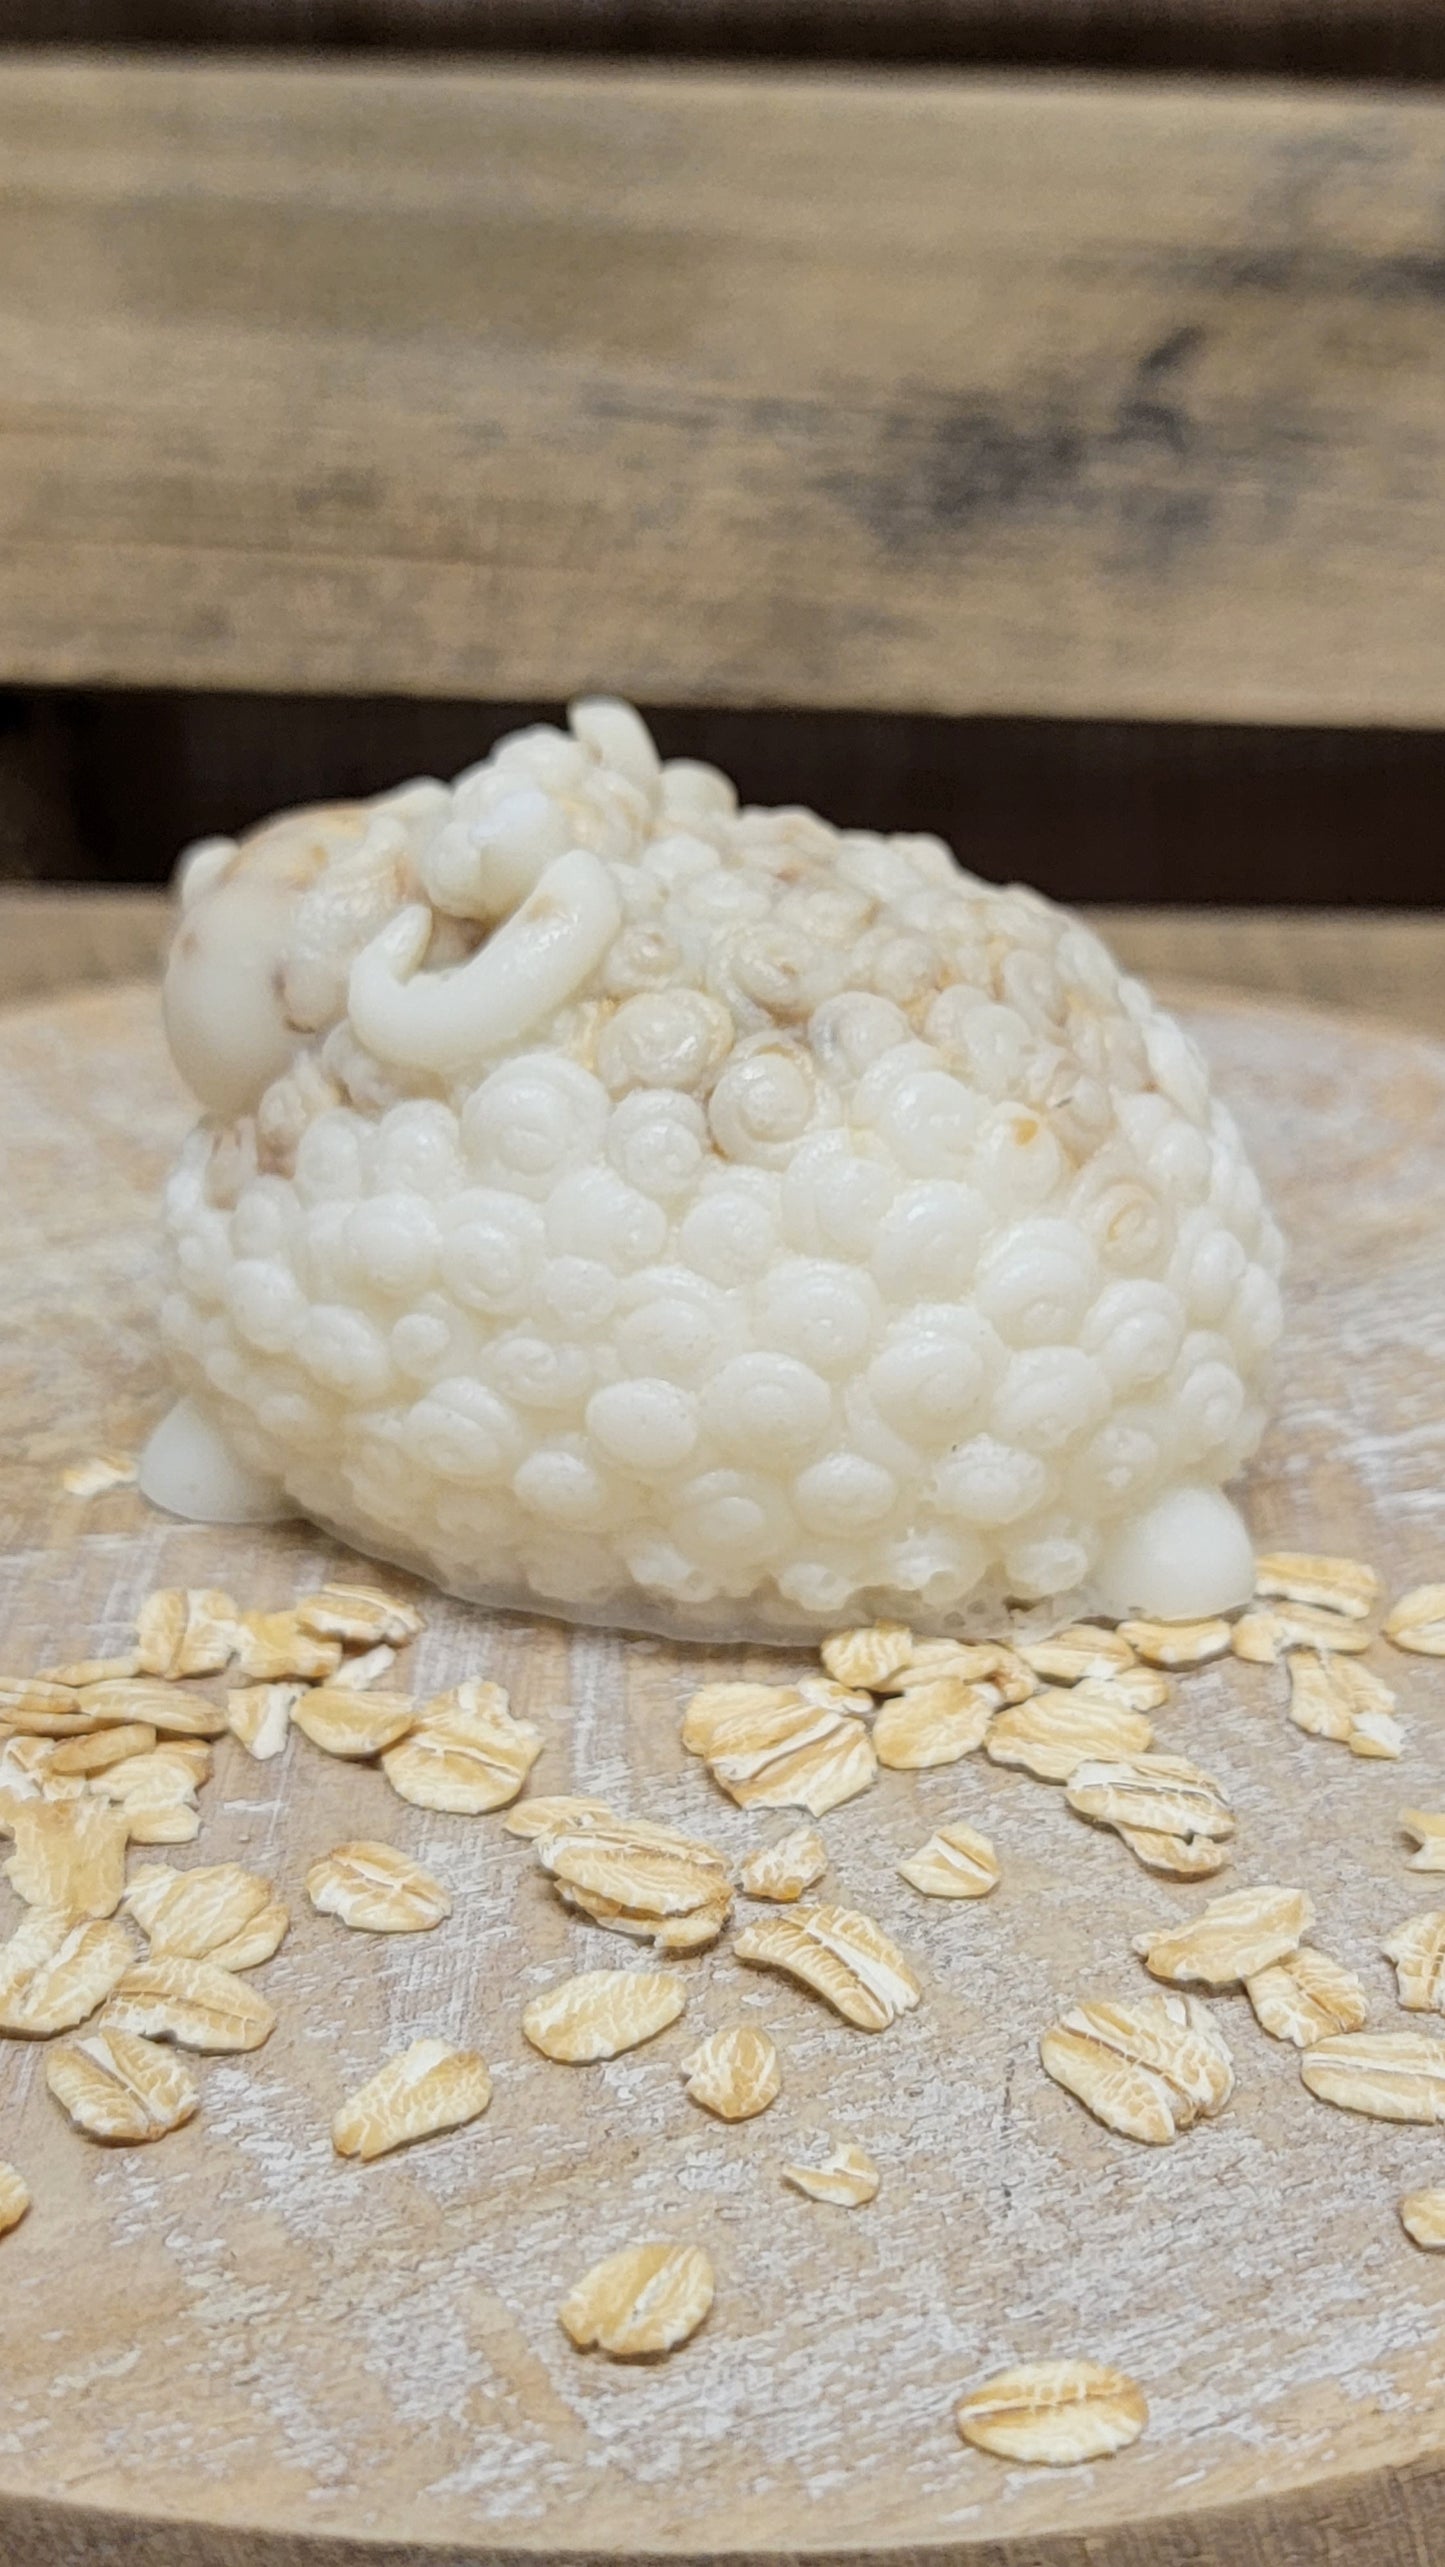 Purebred Goat Milk Soap With Organic Oats - Fun Shapes